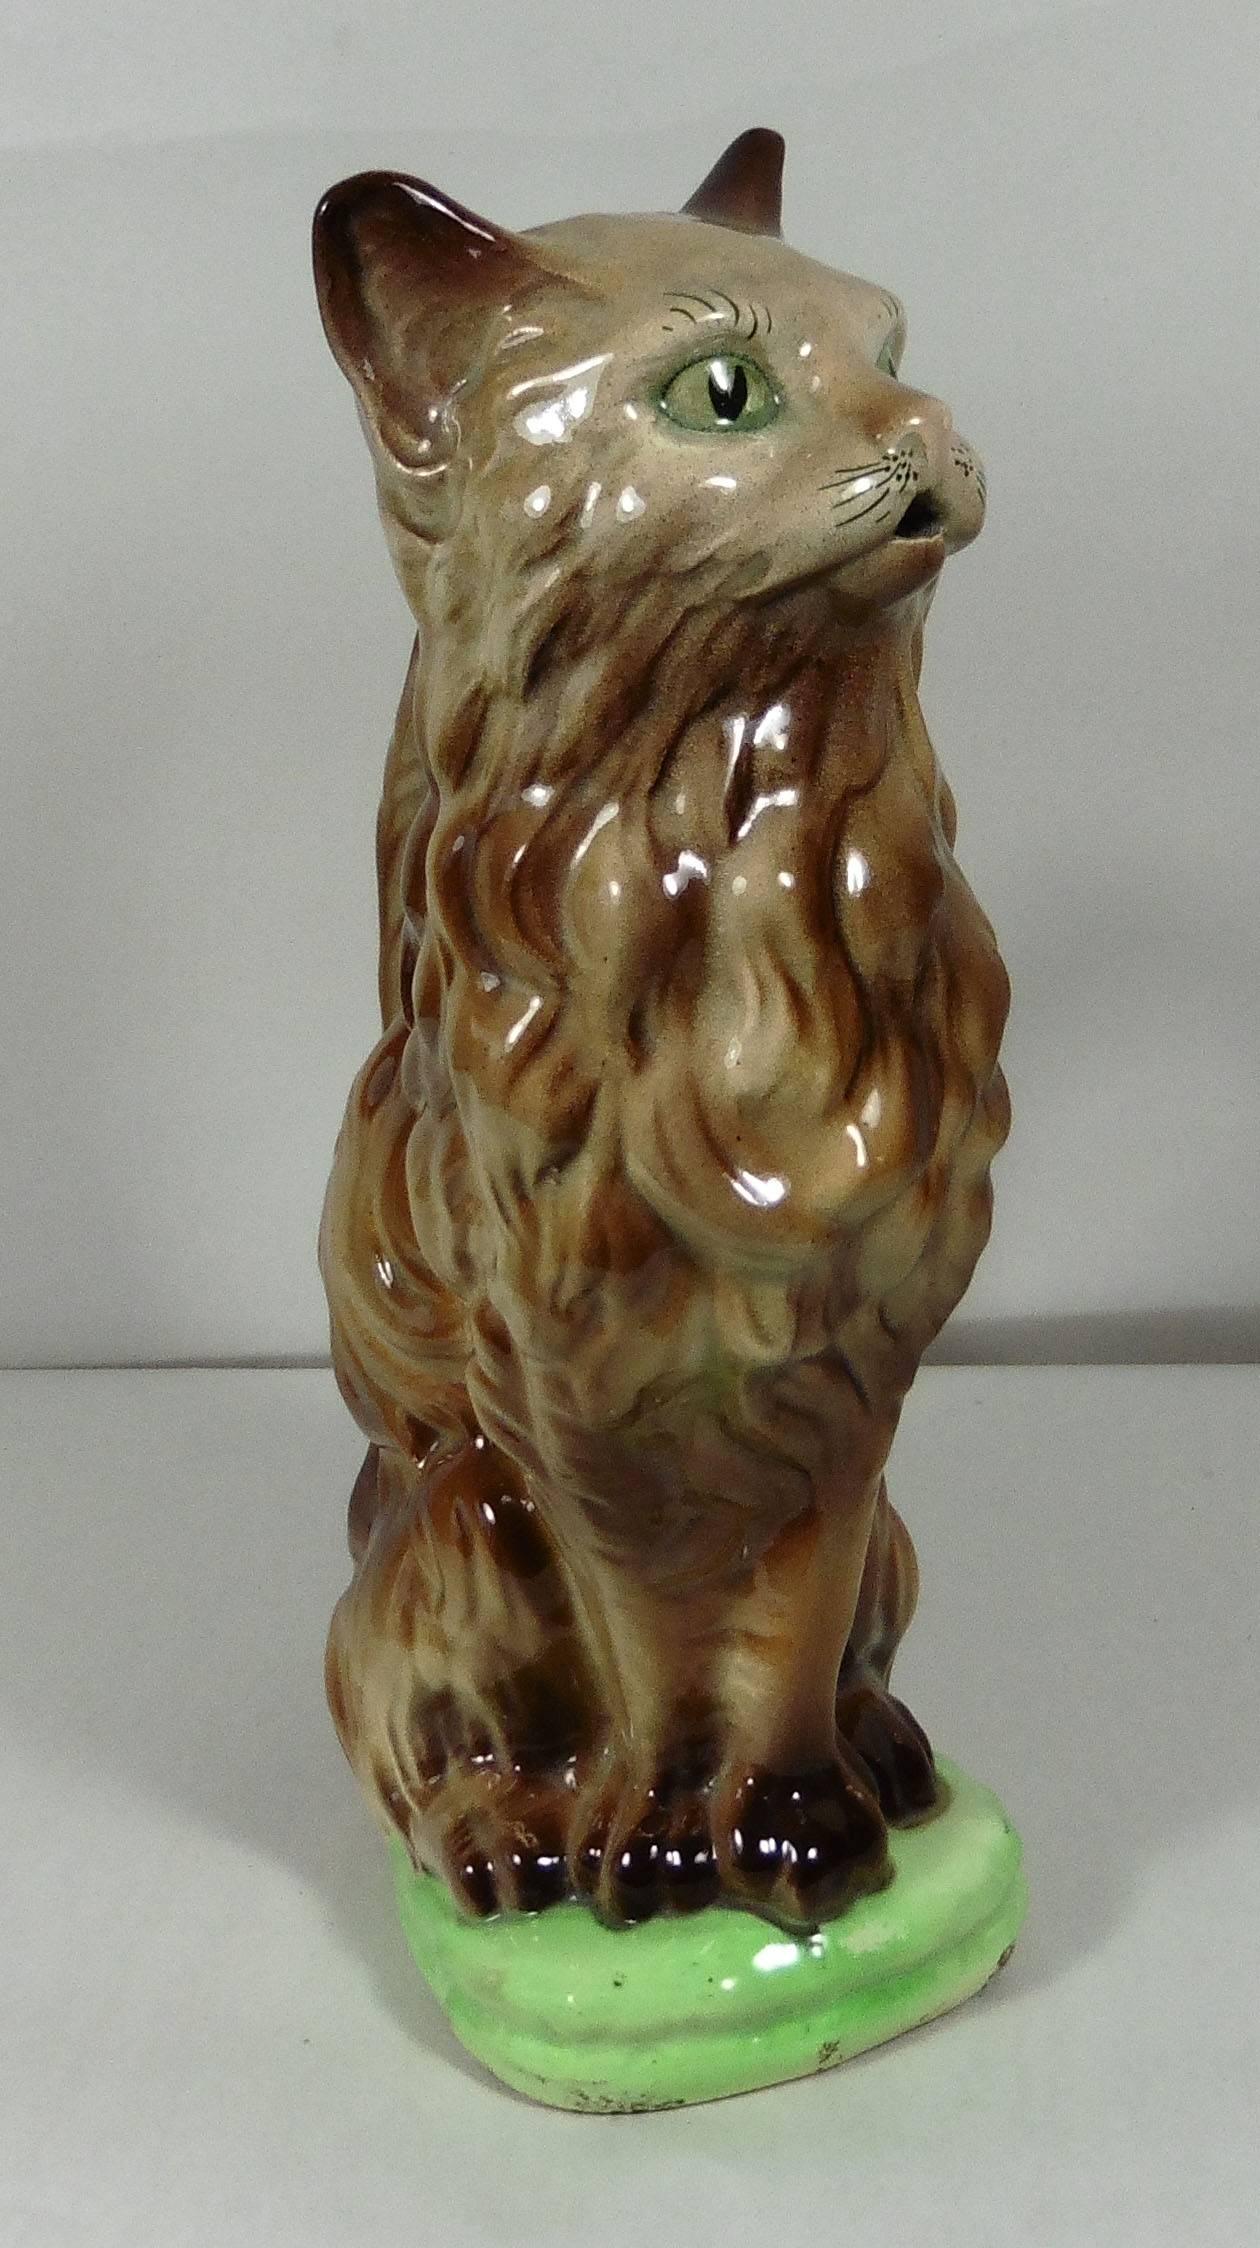 Majolica brown cat pitcher signed Keller and Guerin Saint Clément, circa 1900.
Reference: Page 43 